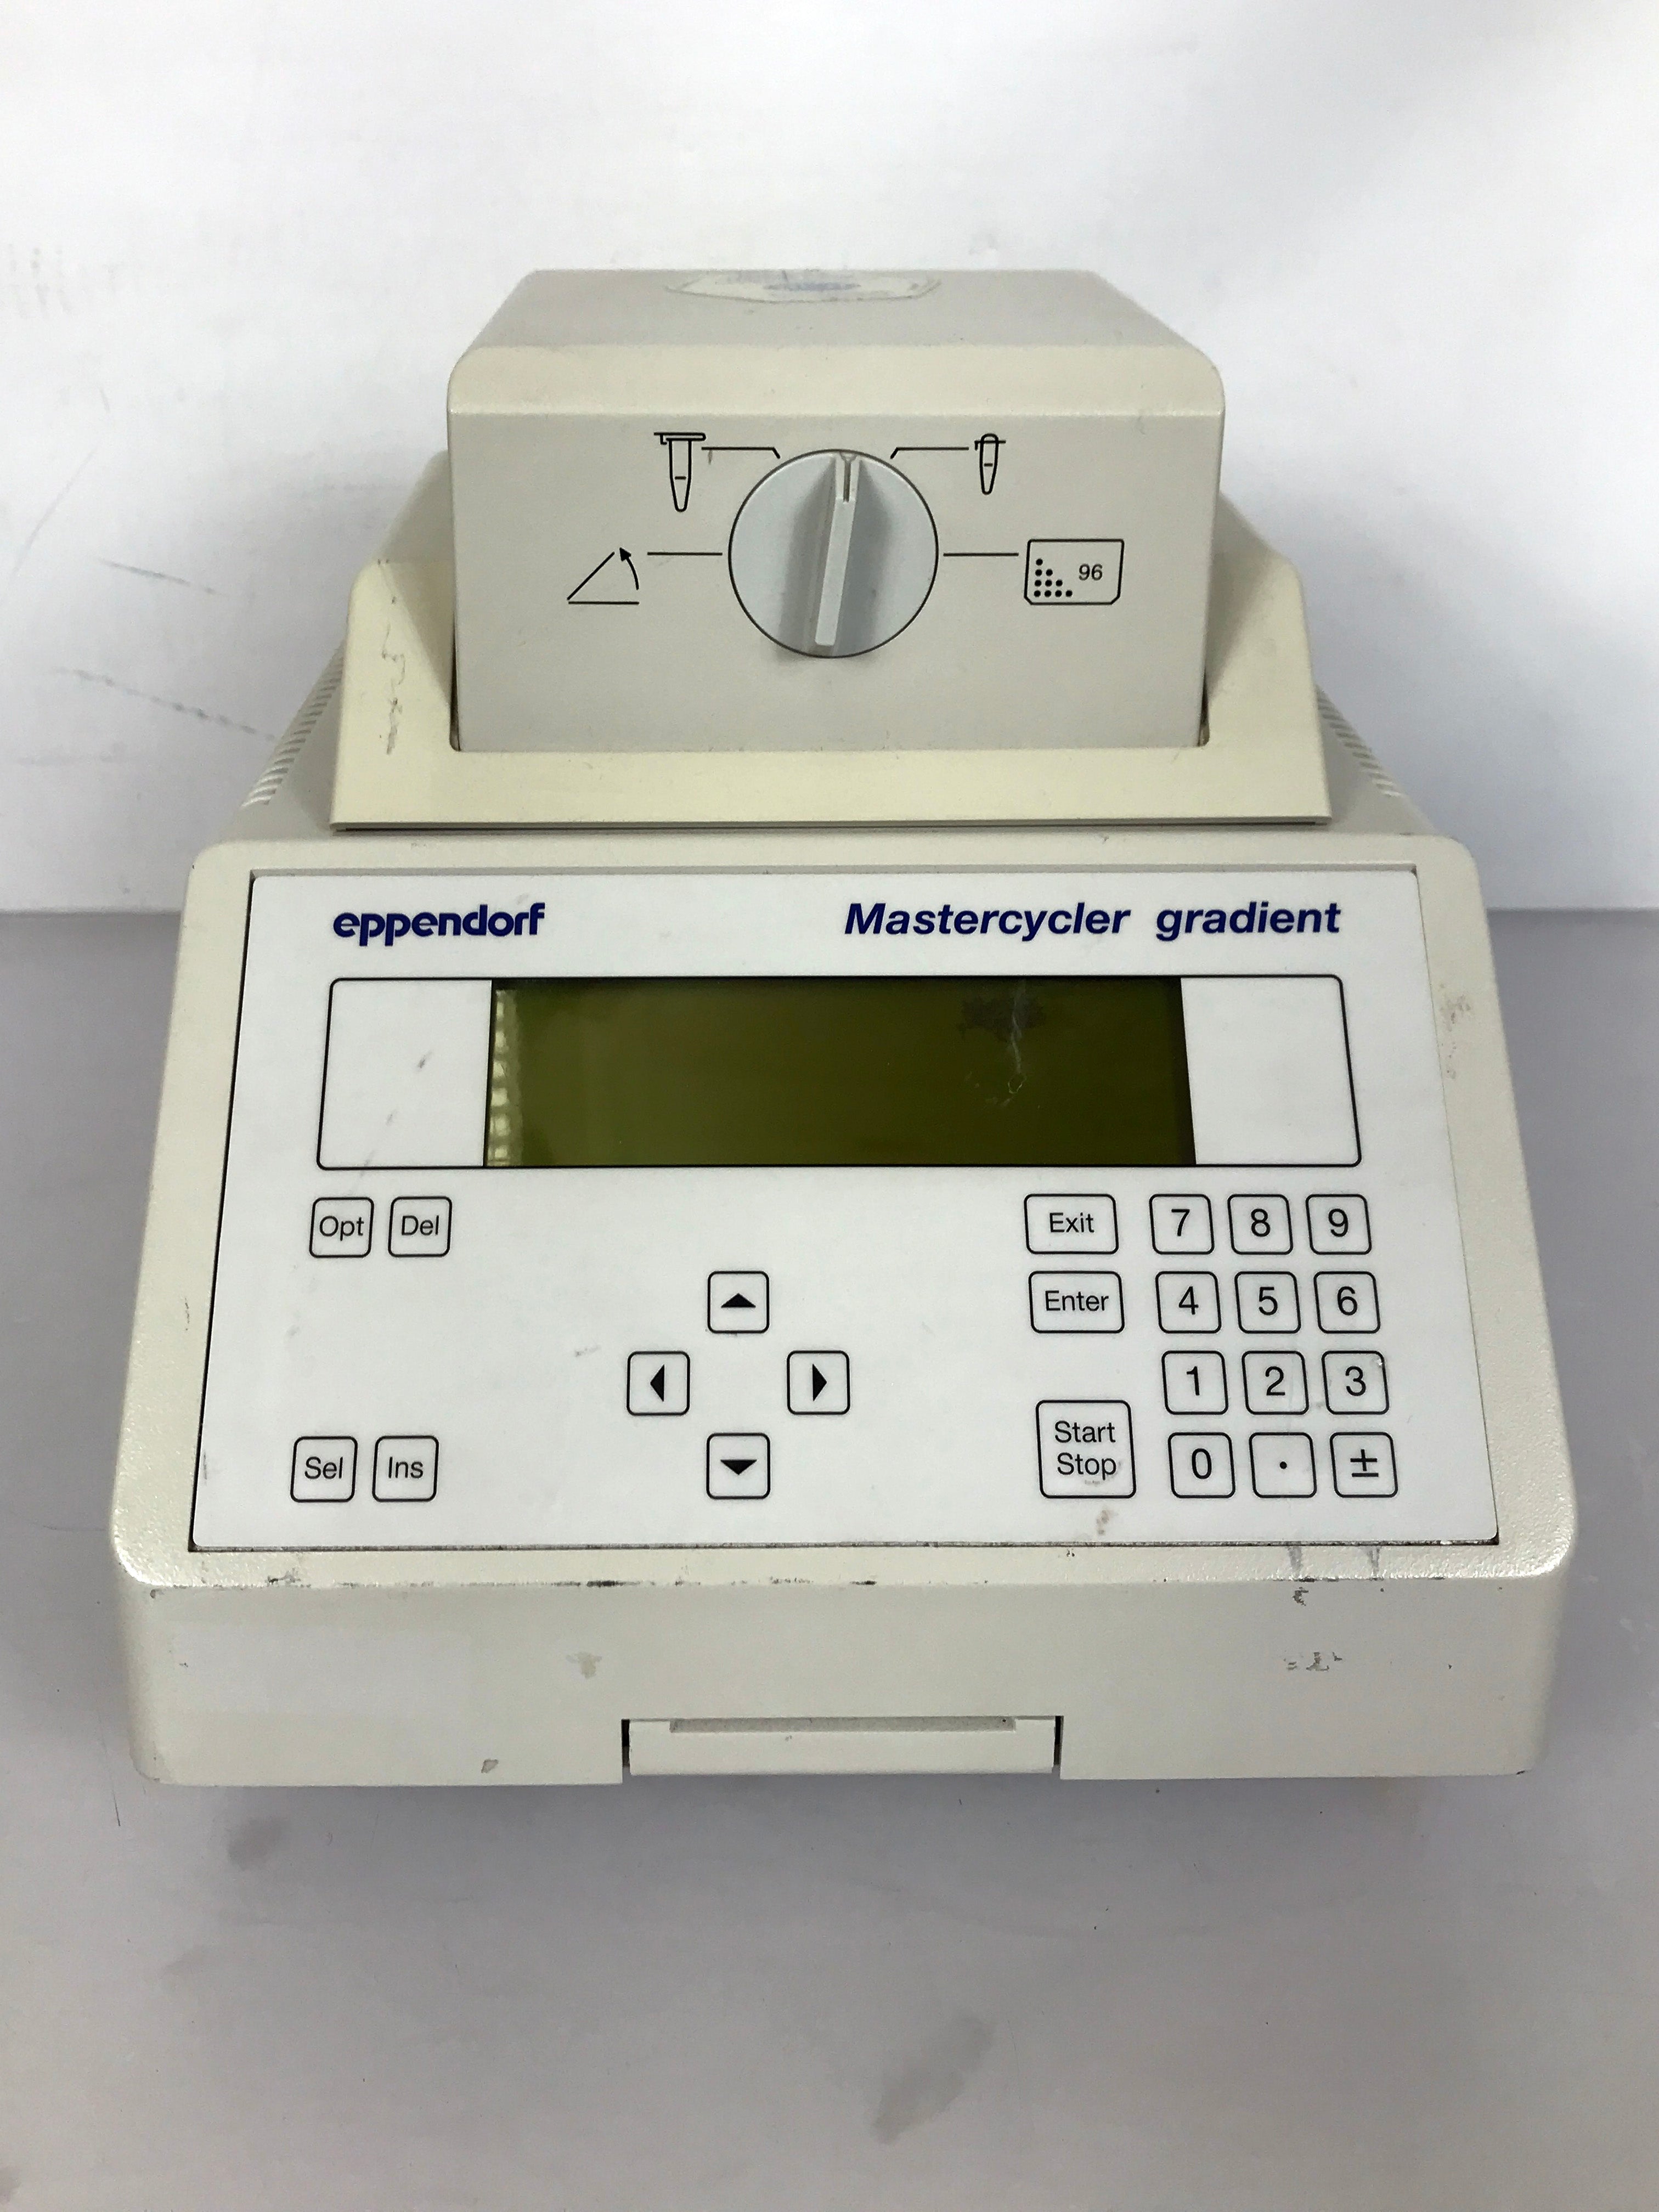 Eppendorf 5331 Mastercycler Gradient Thermal Cycler *For Parts or Repair*